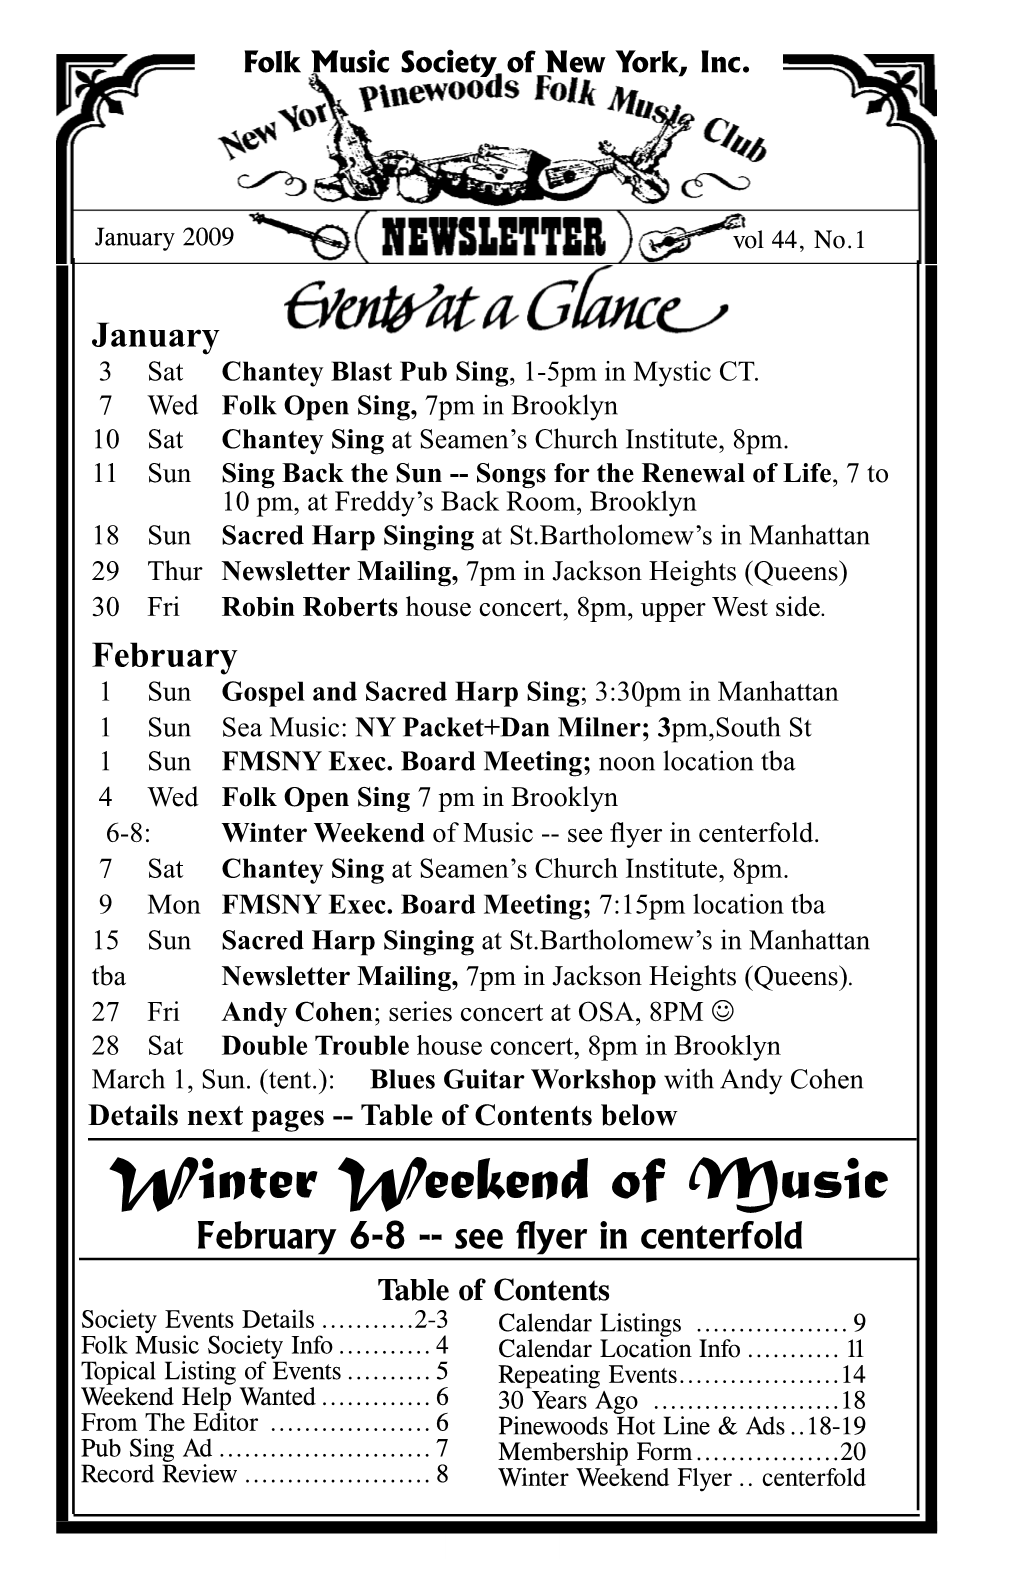 Winter Weekend of Music -- See Flyer in Centerfold